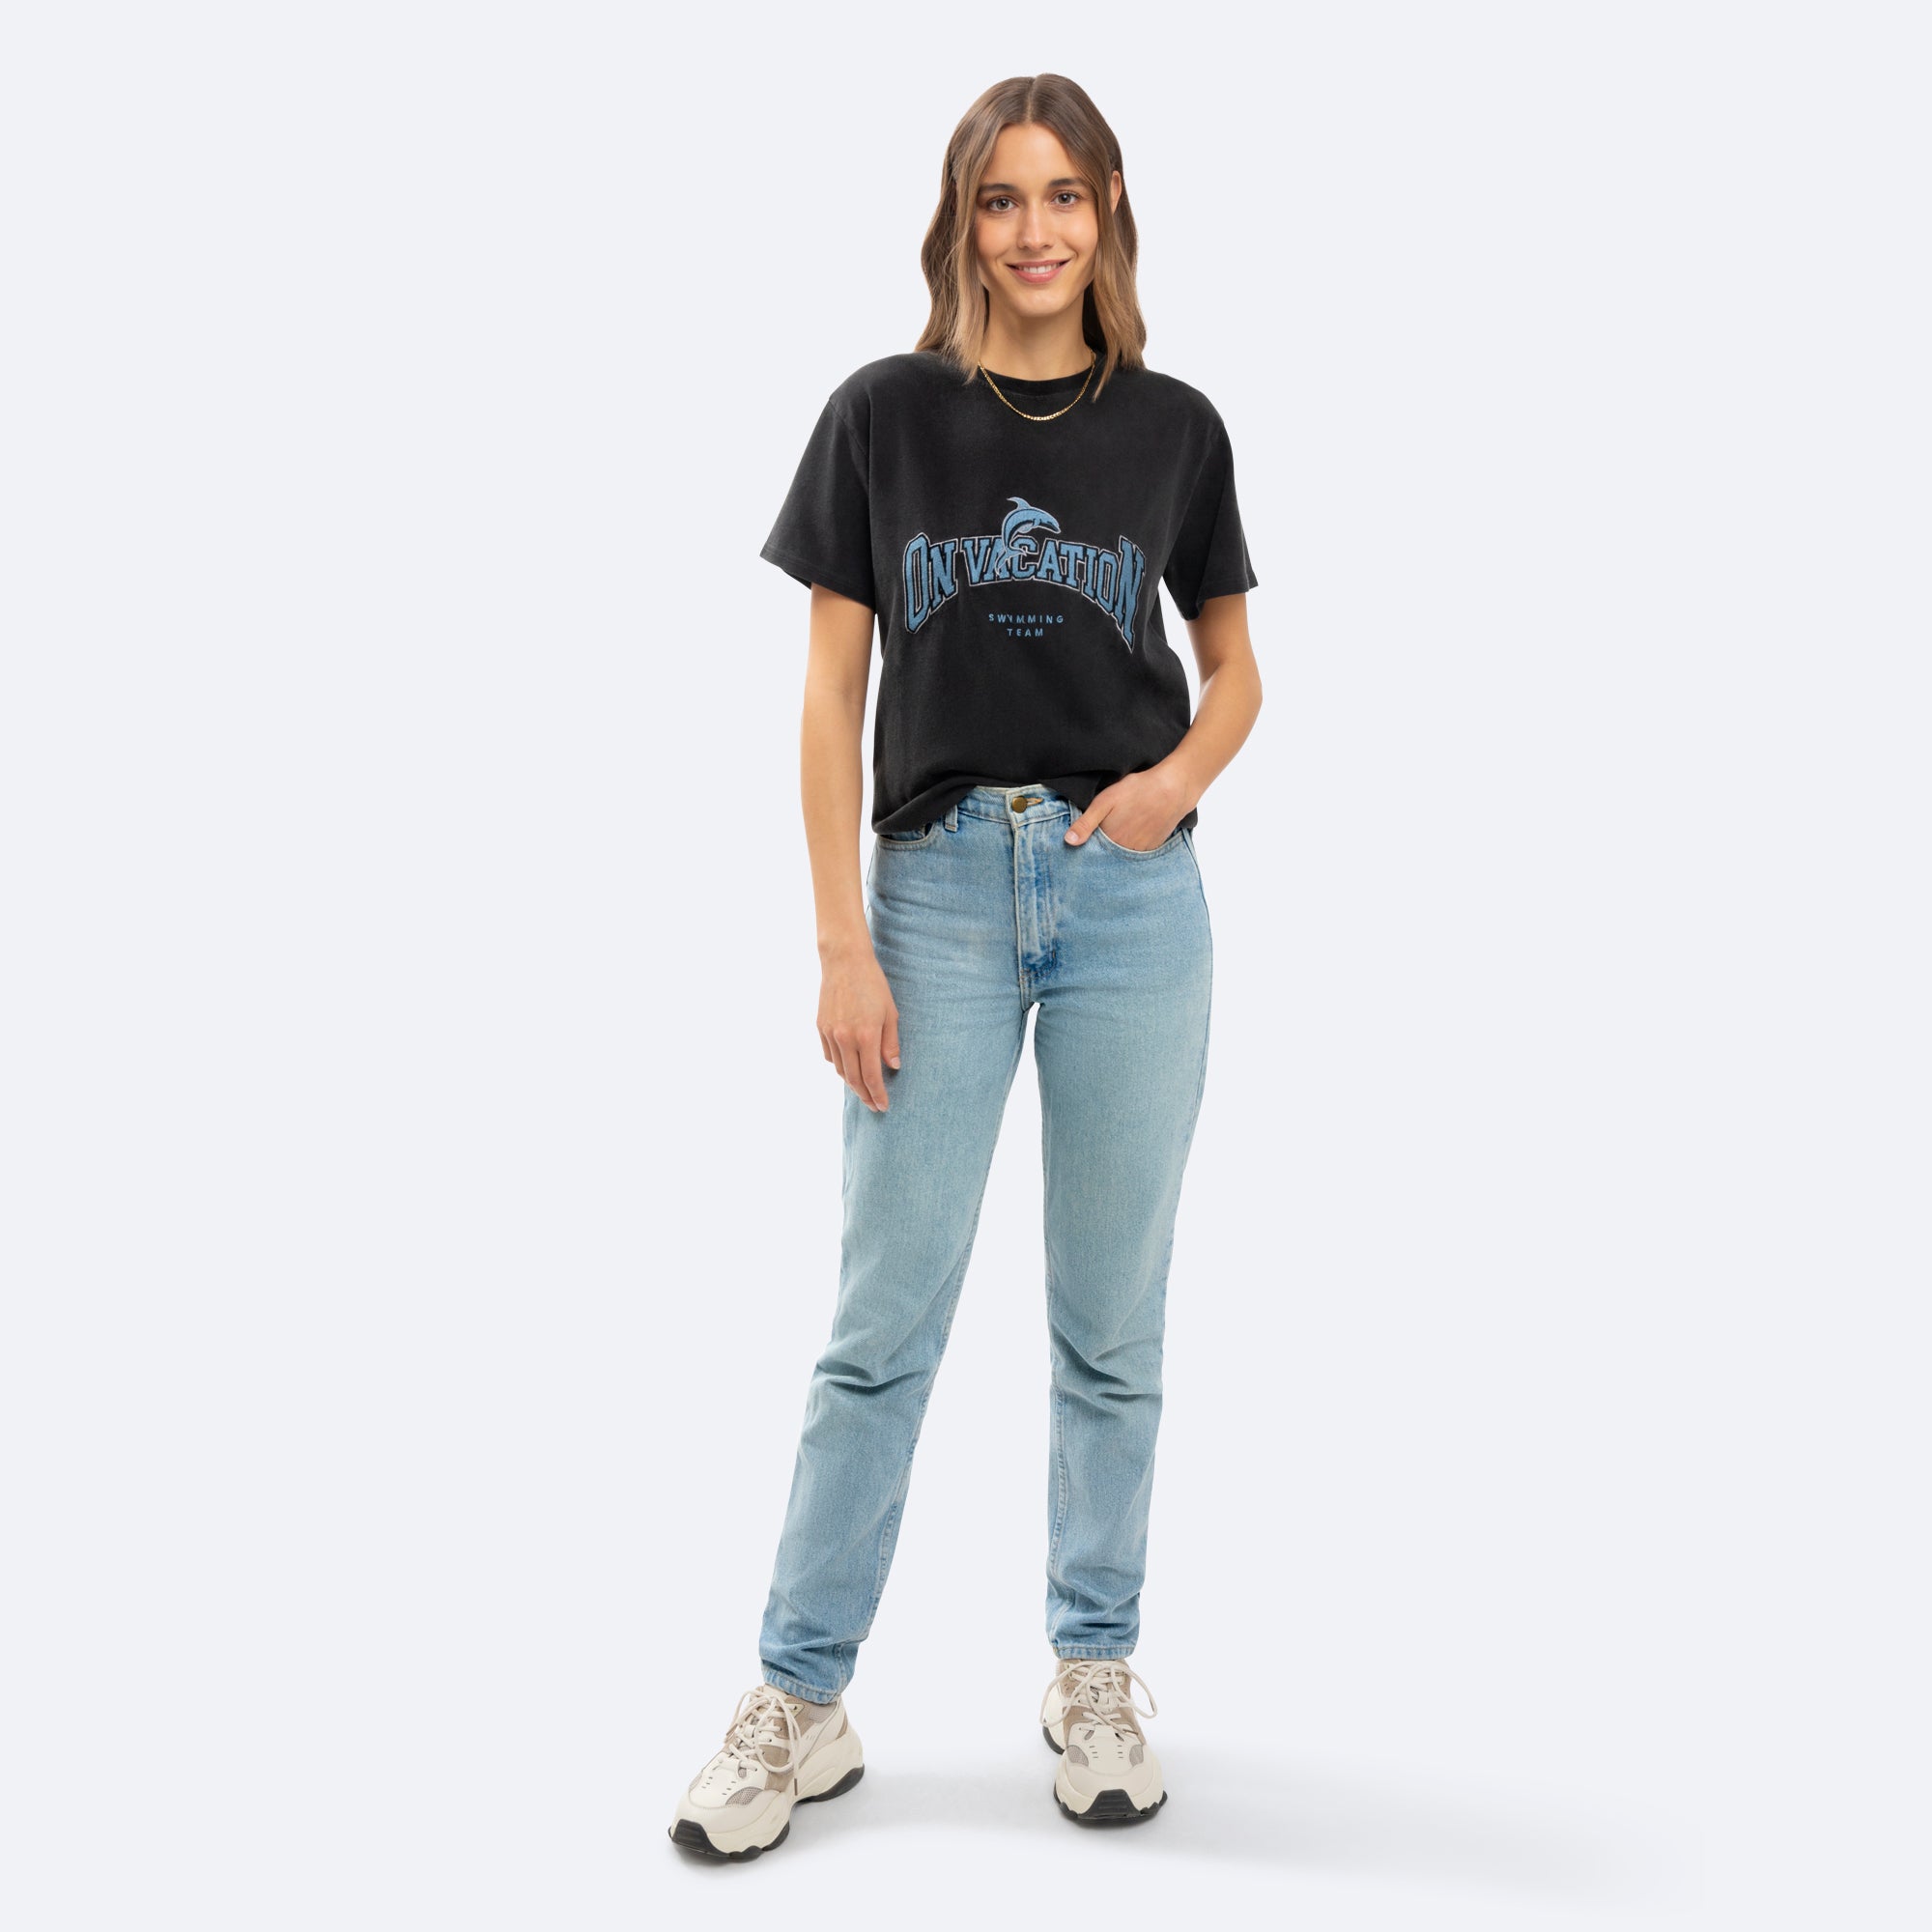 On Vacation Ladies T-Shirt "Dolphin League" - Washed Black